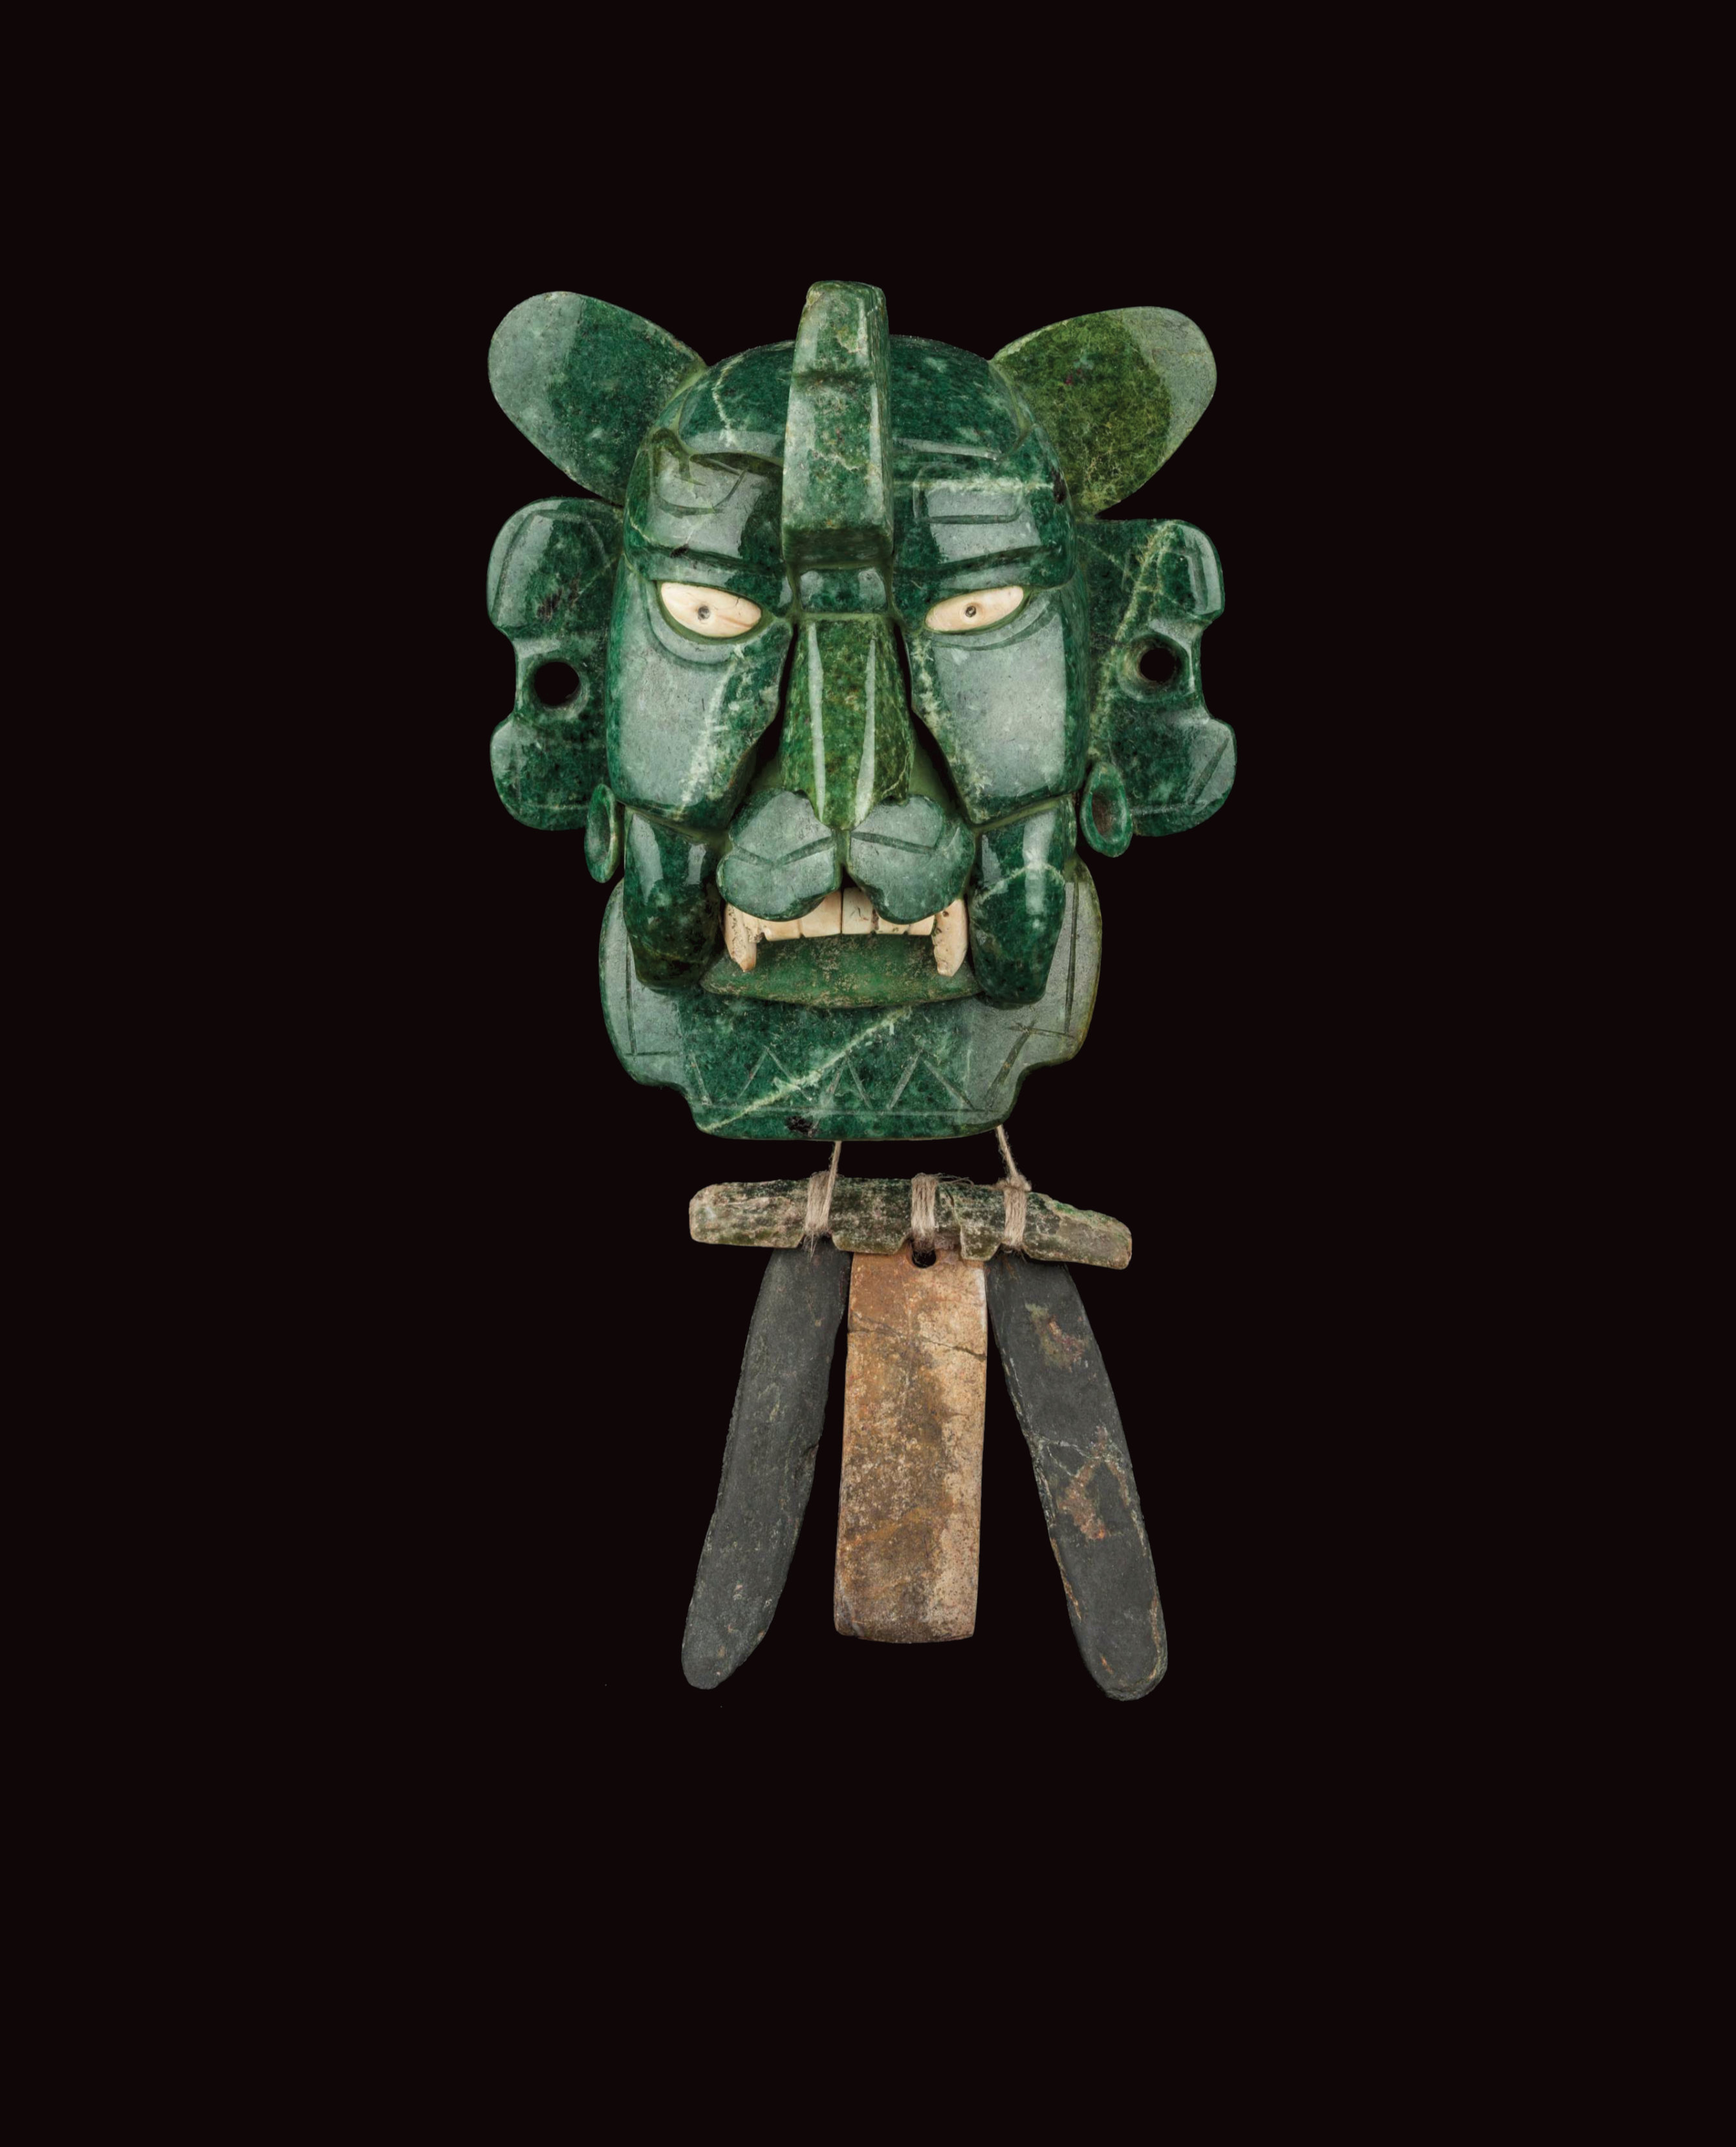  A Zapotec vampire bat mosaic mask made of 25 pieces of jade, with yellow eyes made of shell. Photo by Adrian Hernandez, licensed under cc by-sa 4.0.